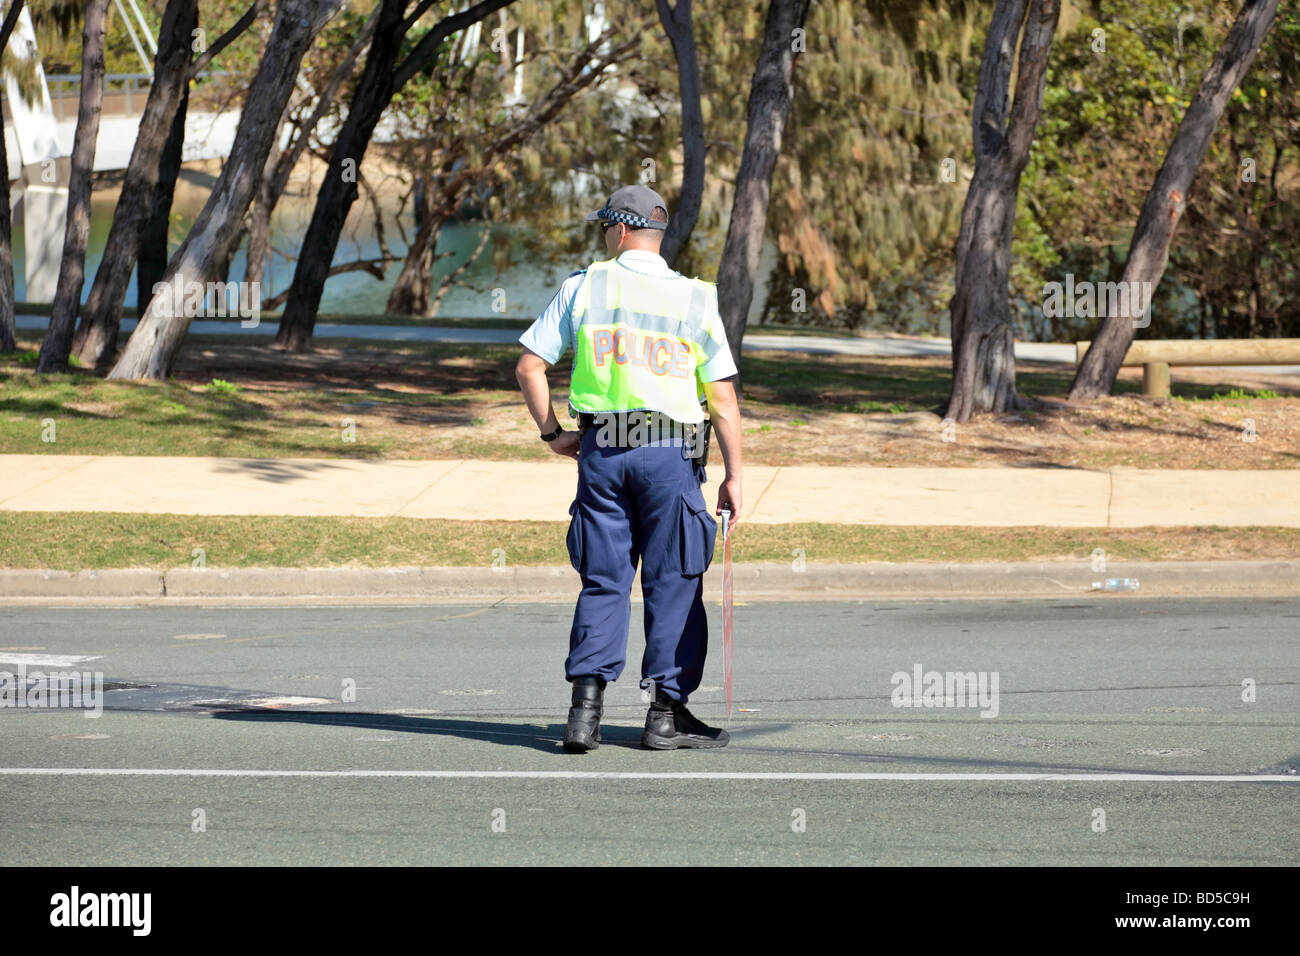 Police set up a random Breathalyser stop during the day Stock Photo